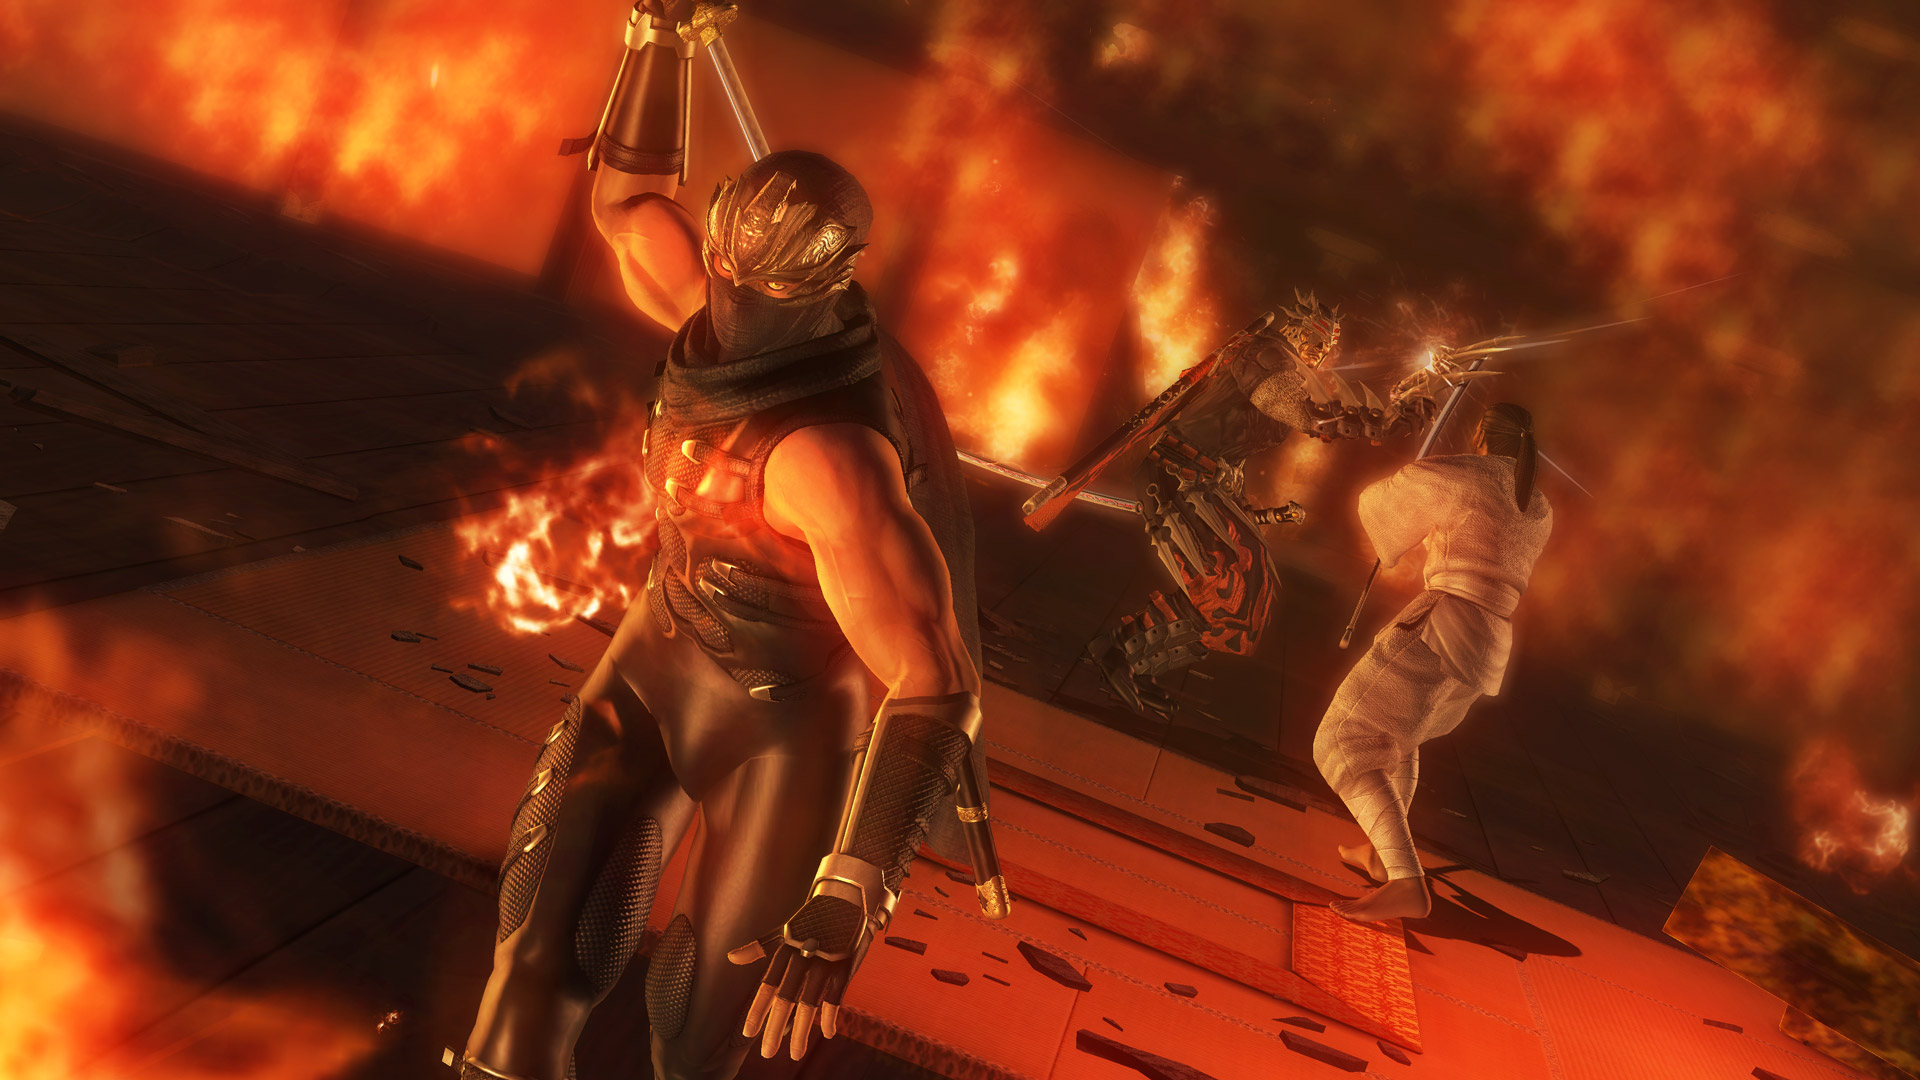 Ninja Gaiden trilogy coming to Switch, PS4, Xbox One, and PC